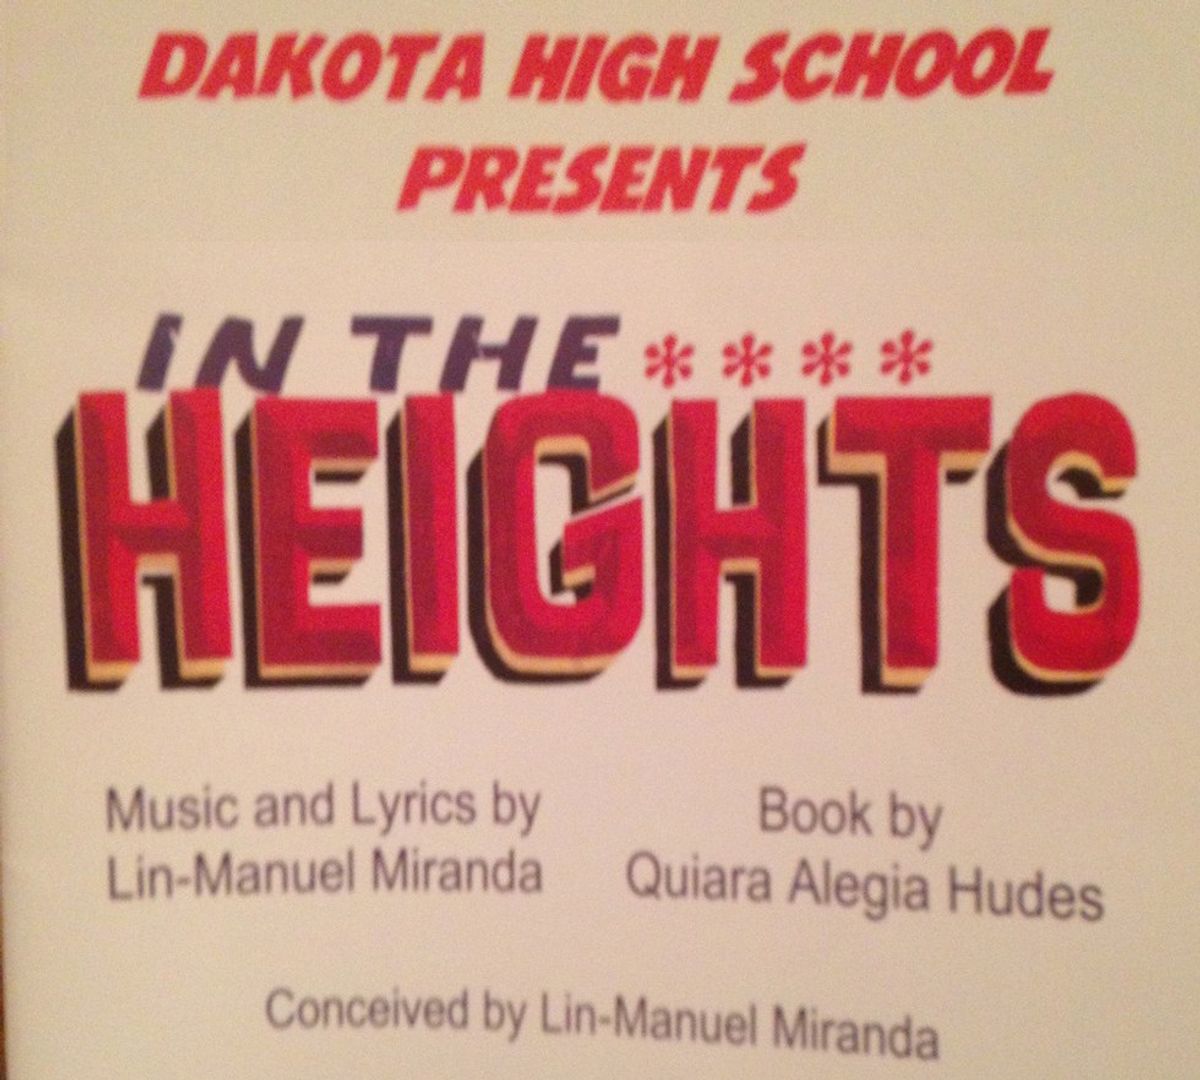 Review: "In the Heights"